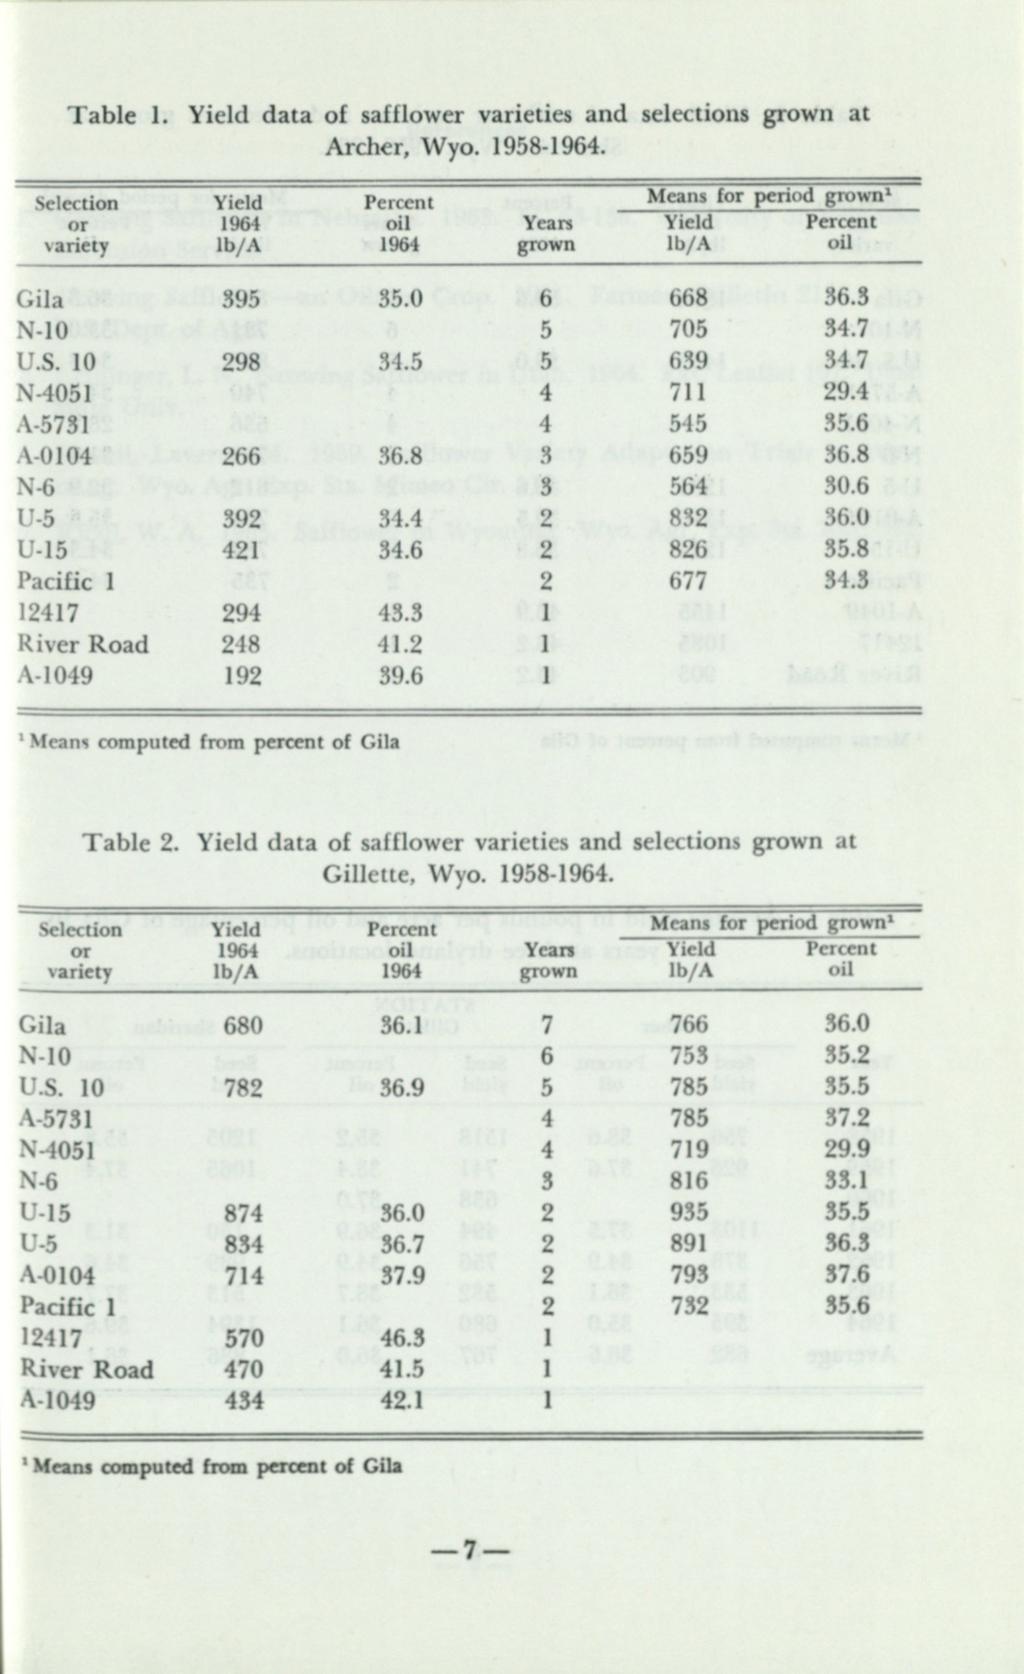 Table 1. Yield data of safflower varieties and selections grown at Archer, Wyo. 1958-1964.